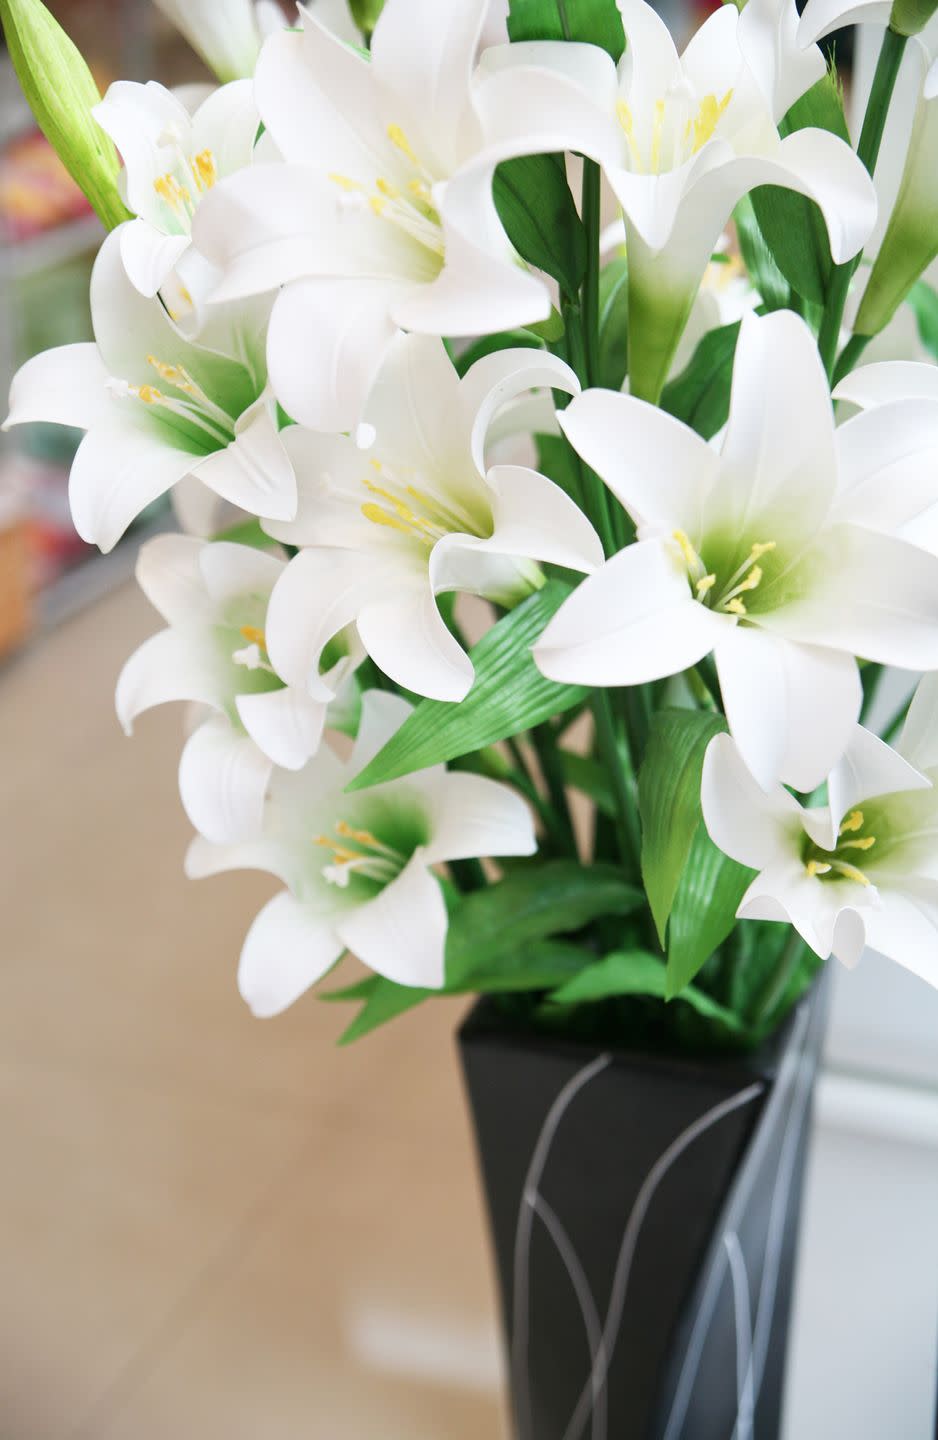 Displaying lilies around the house.